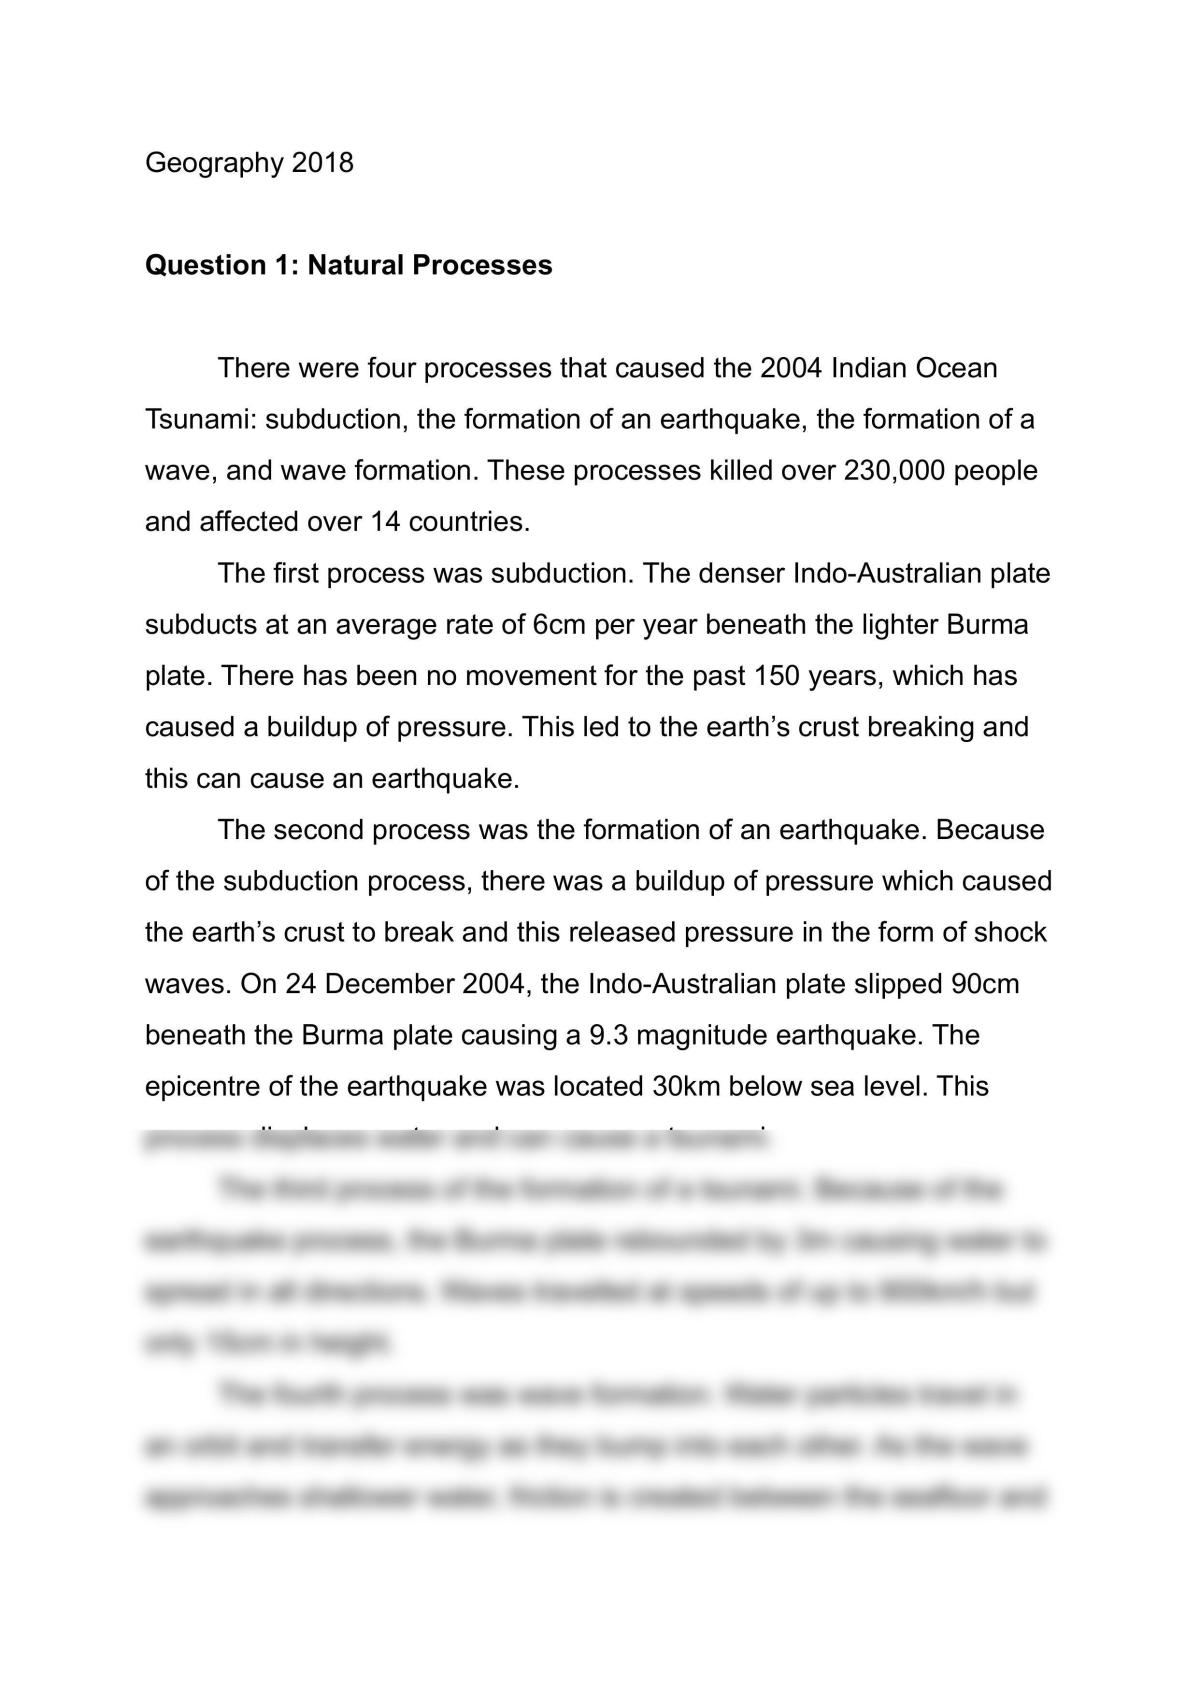 Geography 1.1 2004 Indian Ocean Tsunami - Page 1